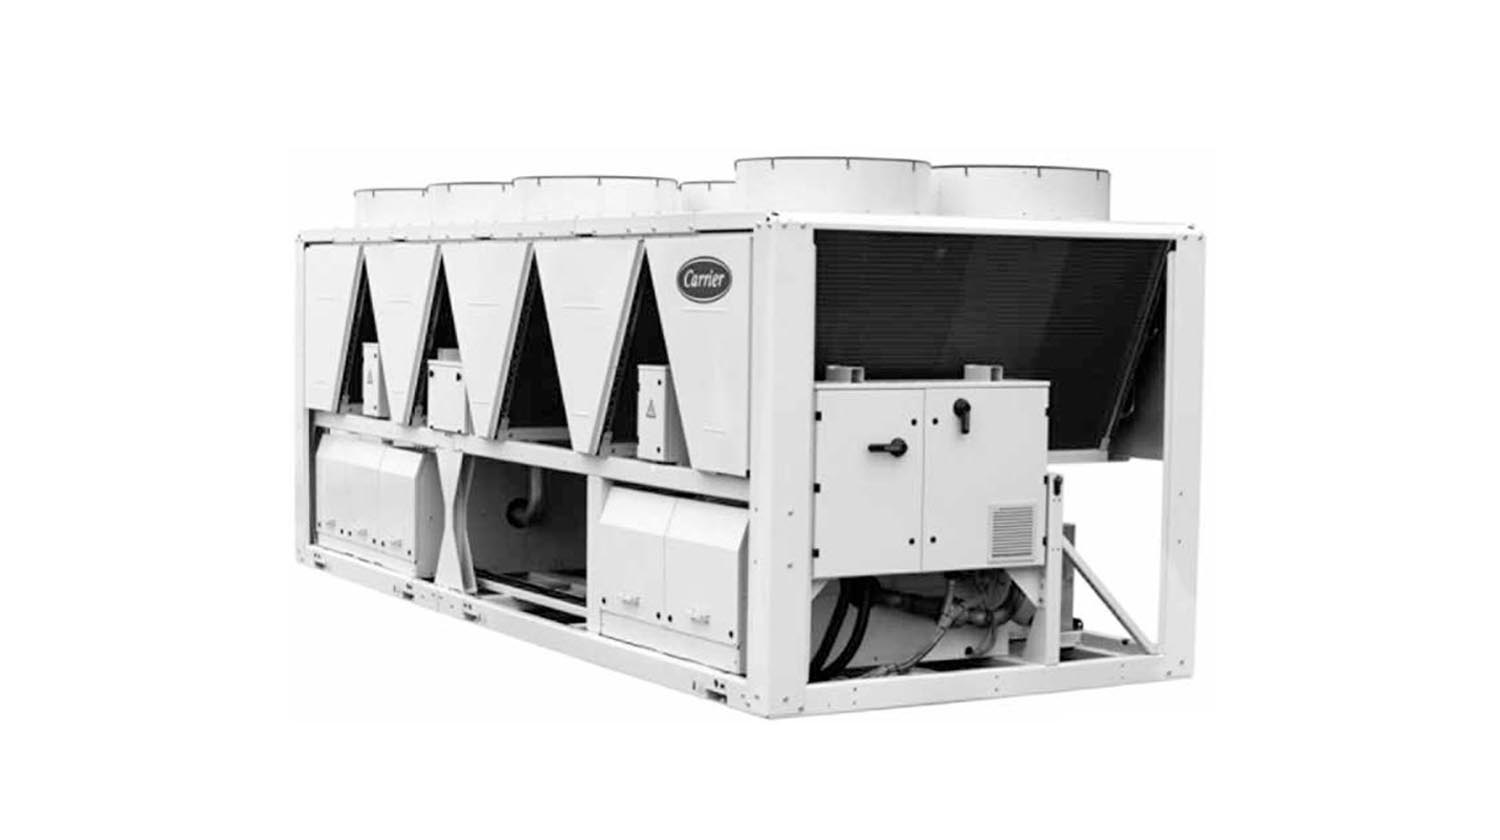 Carrier Aquaforce Chillers	